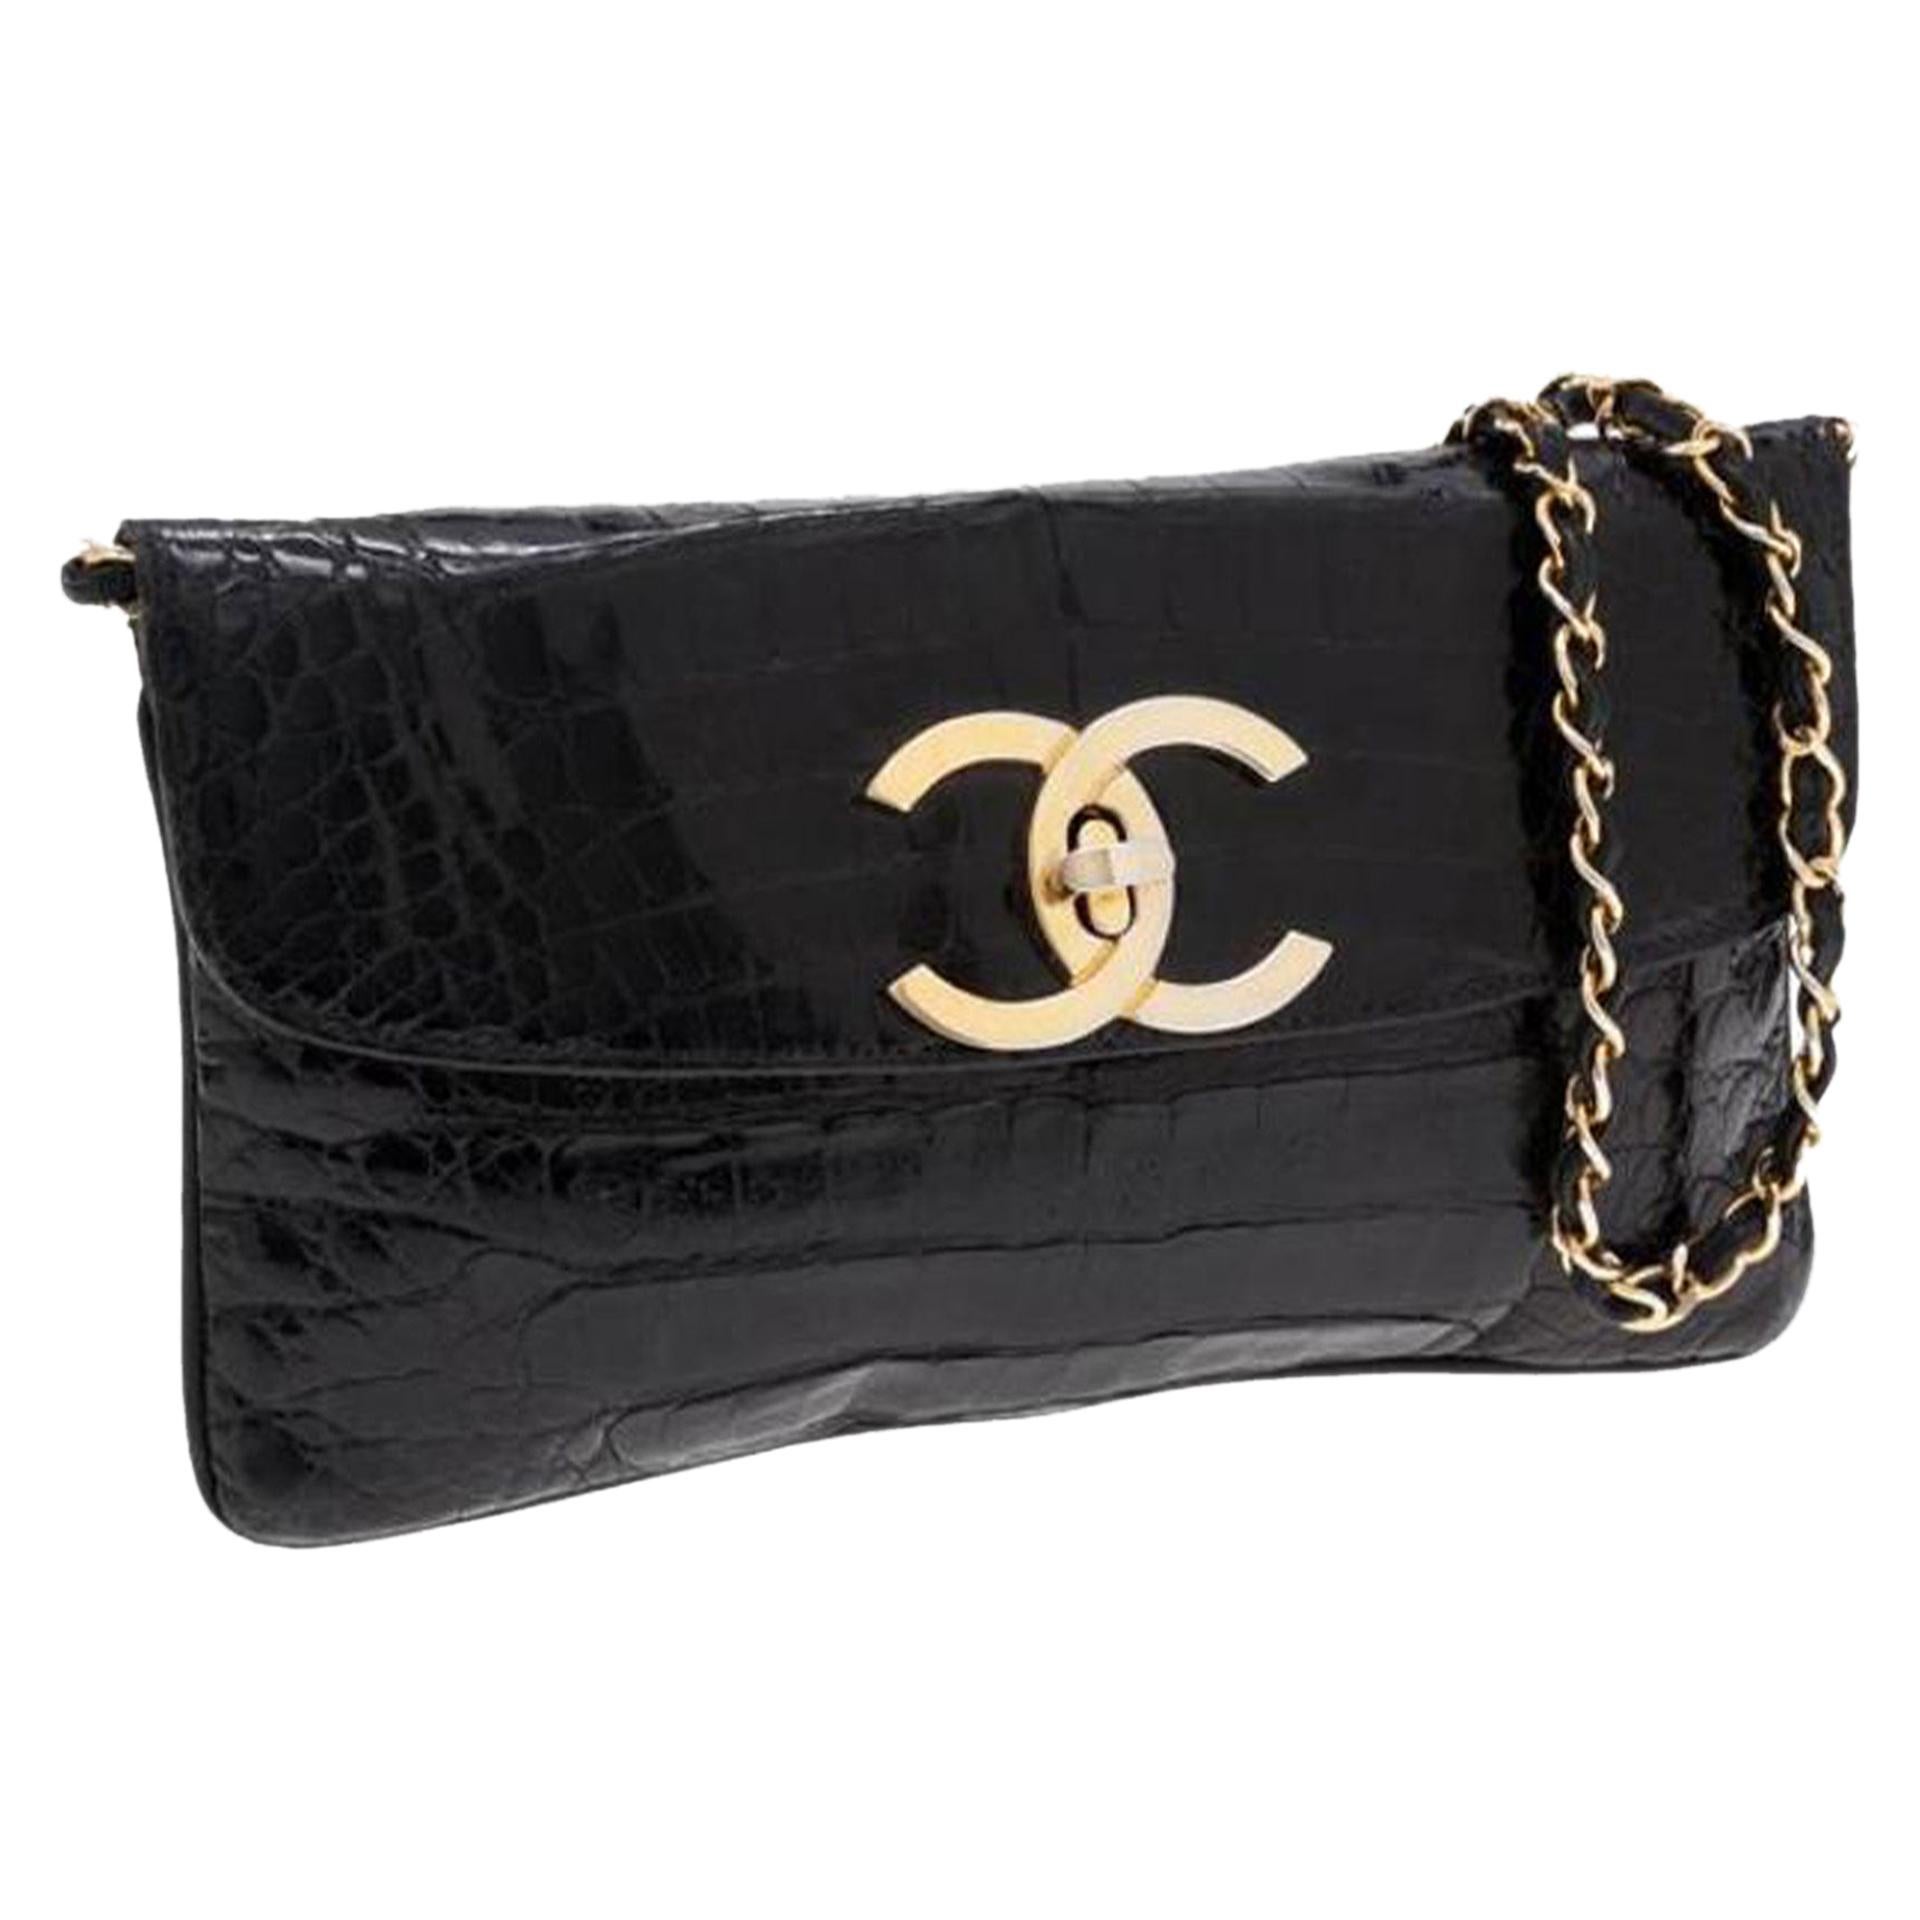 Small black Chanel crocodile envelope flap with vintage chain

1990 {VINTAGE 33 Years}
Vintage gold hardware
Interior black leather lining
Crocodile detail on chain
Zippered center pocket
Vintage male/female closure
Crocodile CC logo detail
Strap